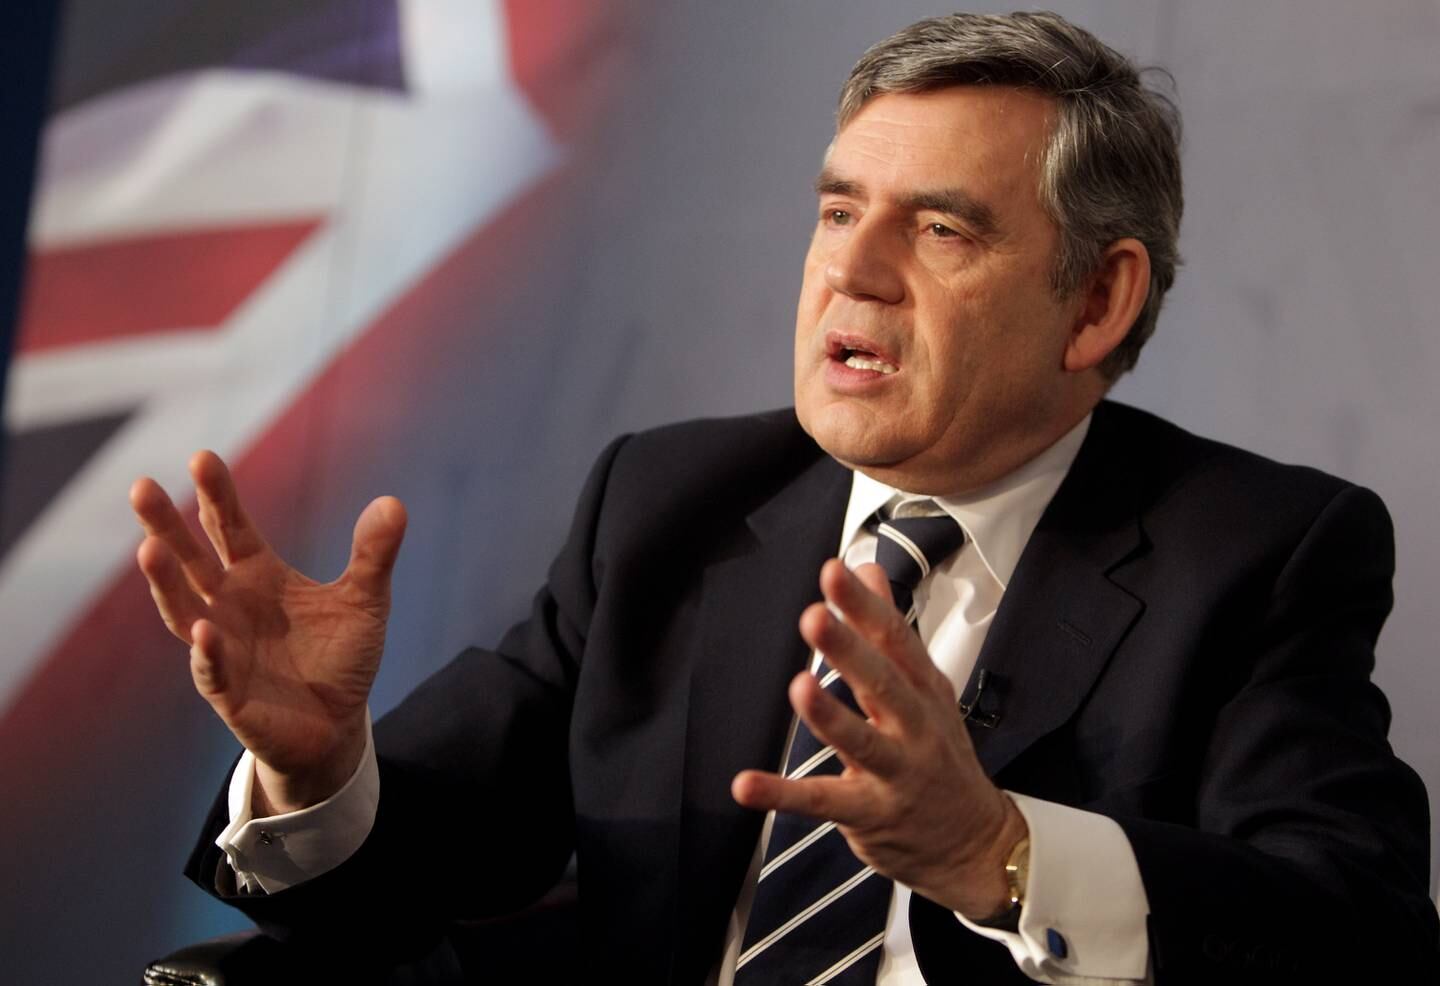 Gordon Brown answers audience questions after delivering a speech in Reading Town Hall in 2010. Getty Images